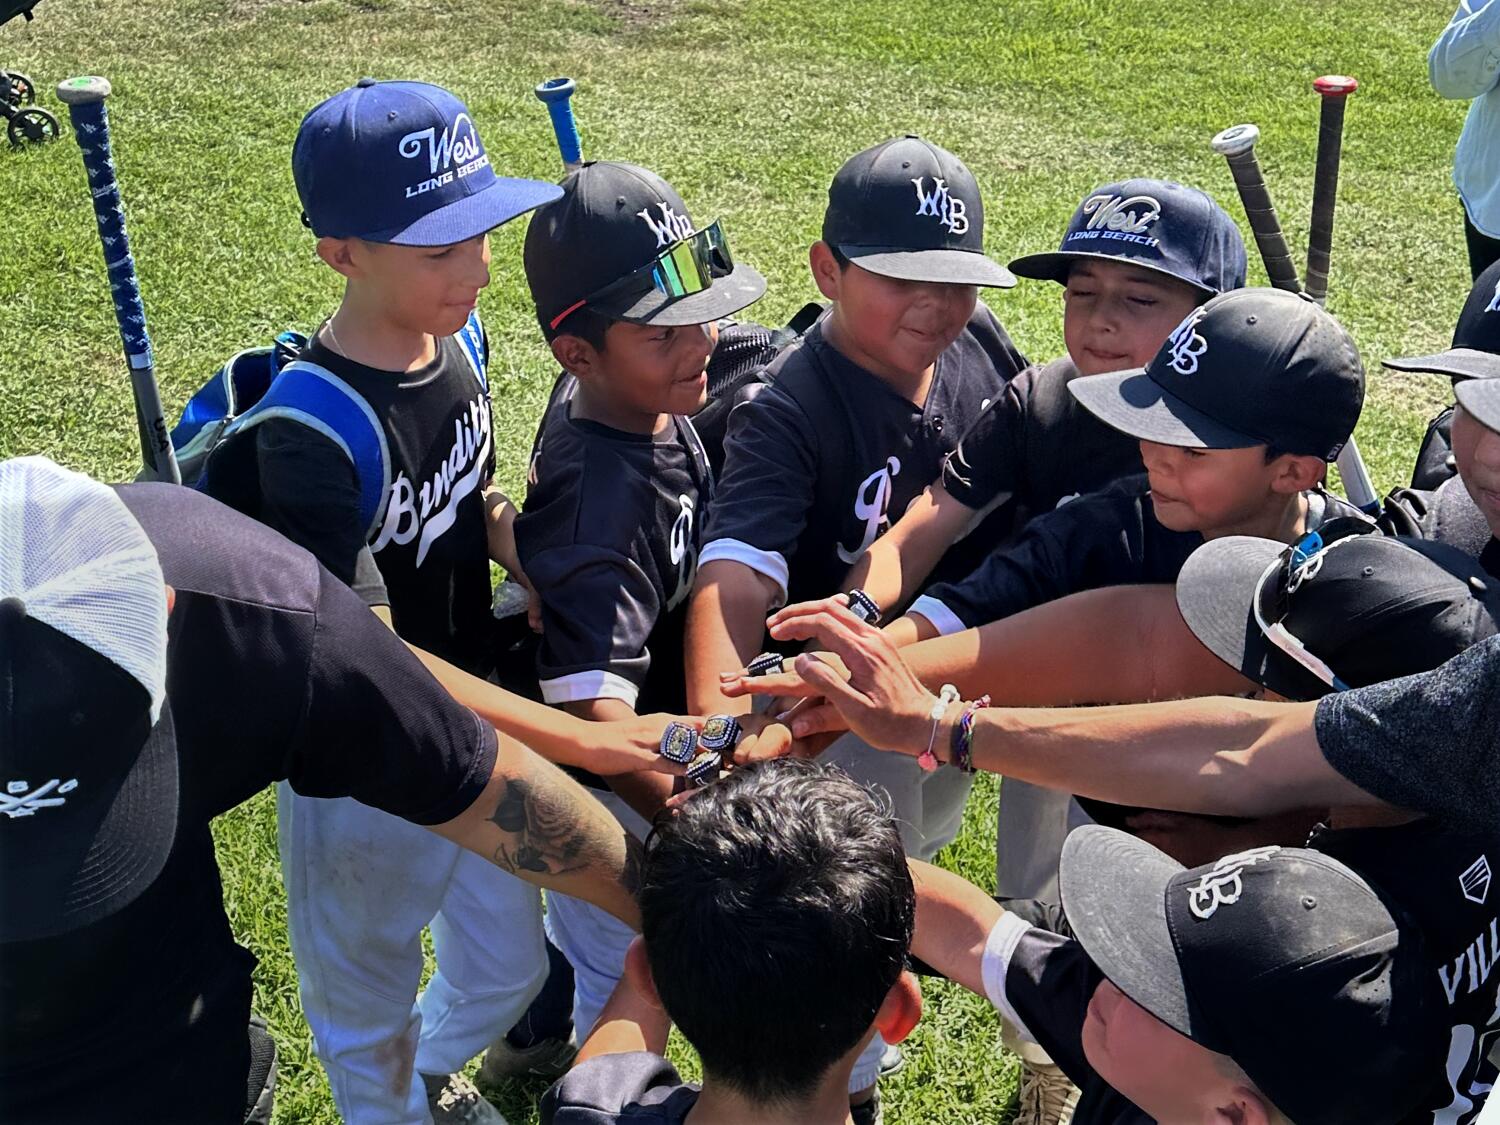 Community goes to bat for West Long Beach Little League after equipment theft